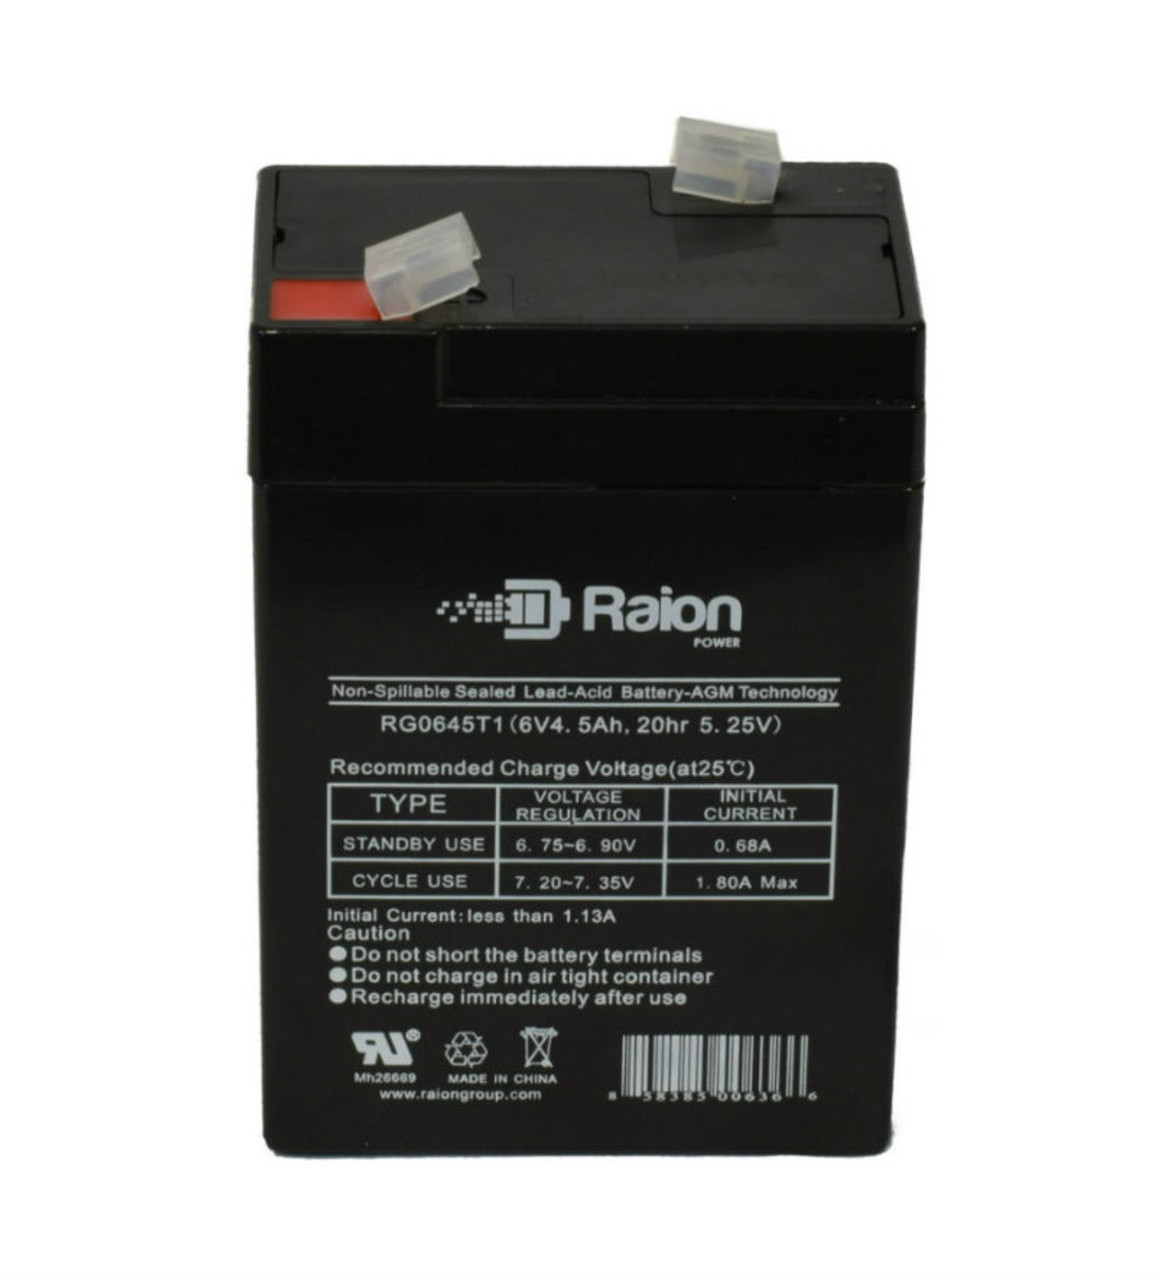 Raion Power RG0645T1 Replacement Battery Cartridge for National Power Corporation GS012PS6